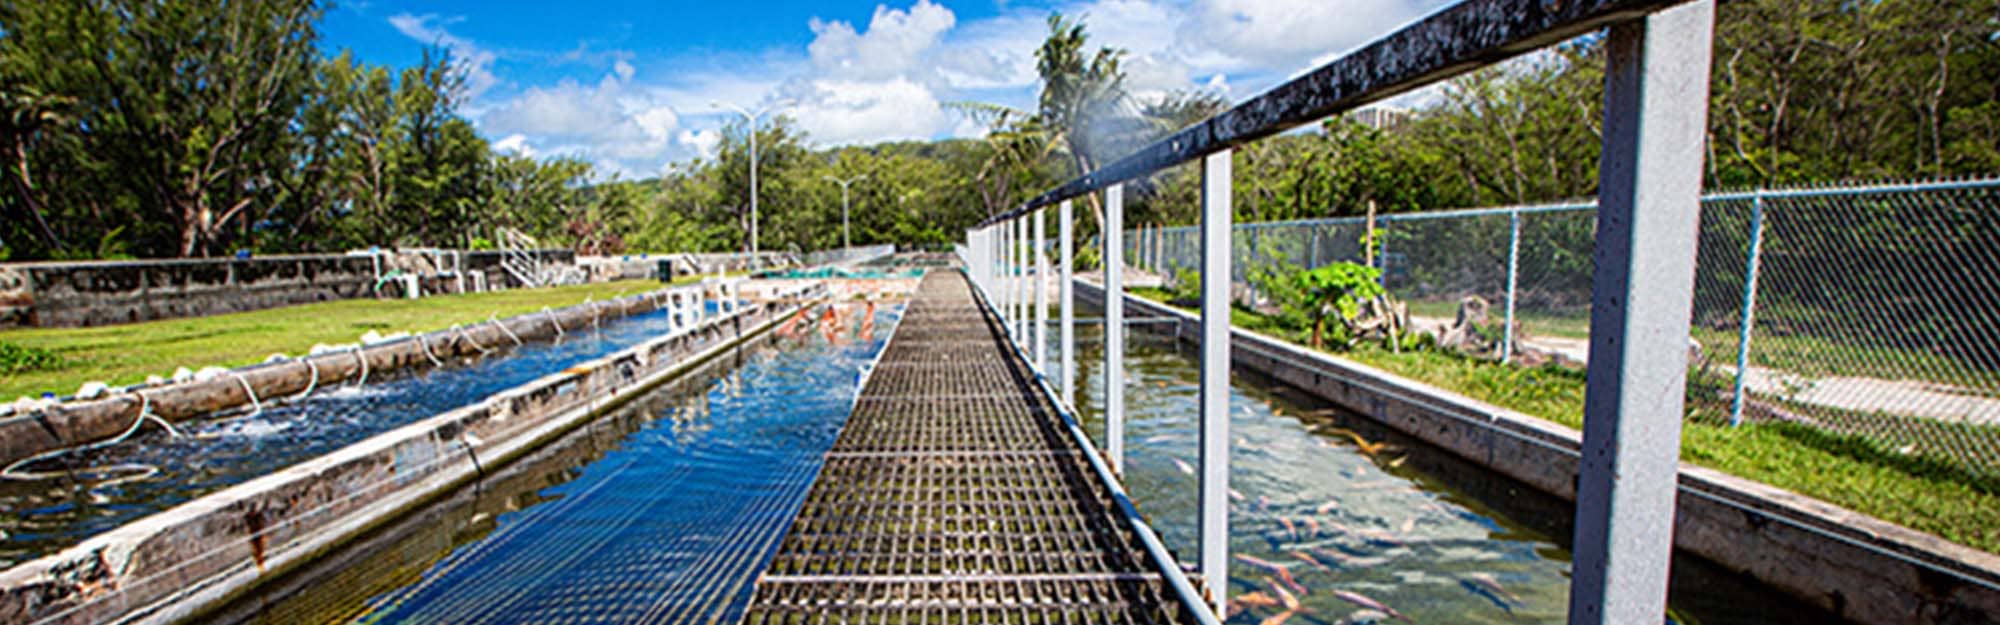 Researchers are conducting salinity studies for talapia raised at the hatchery.